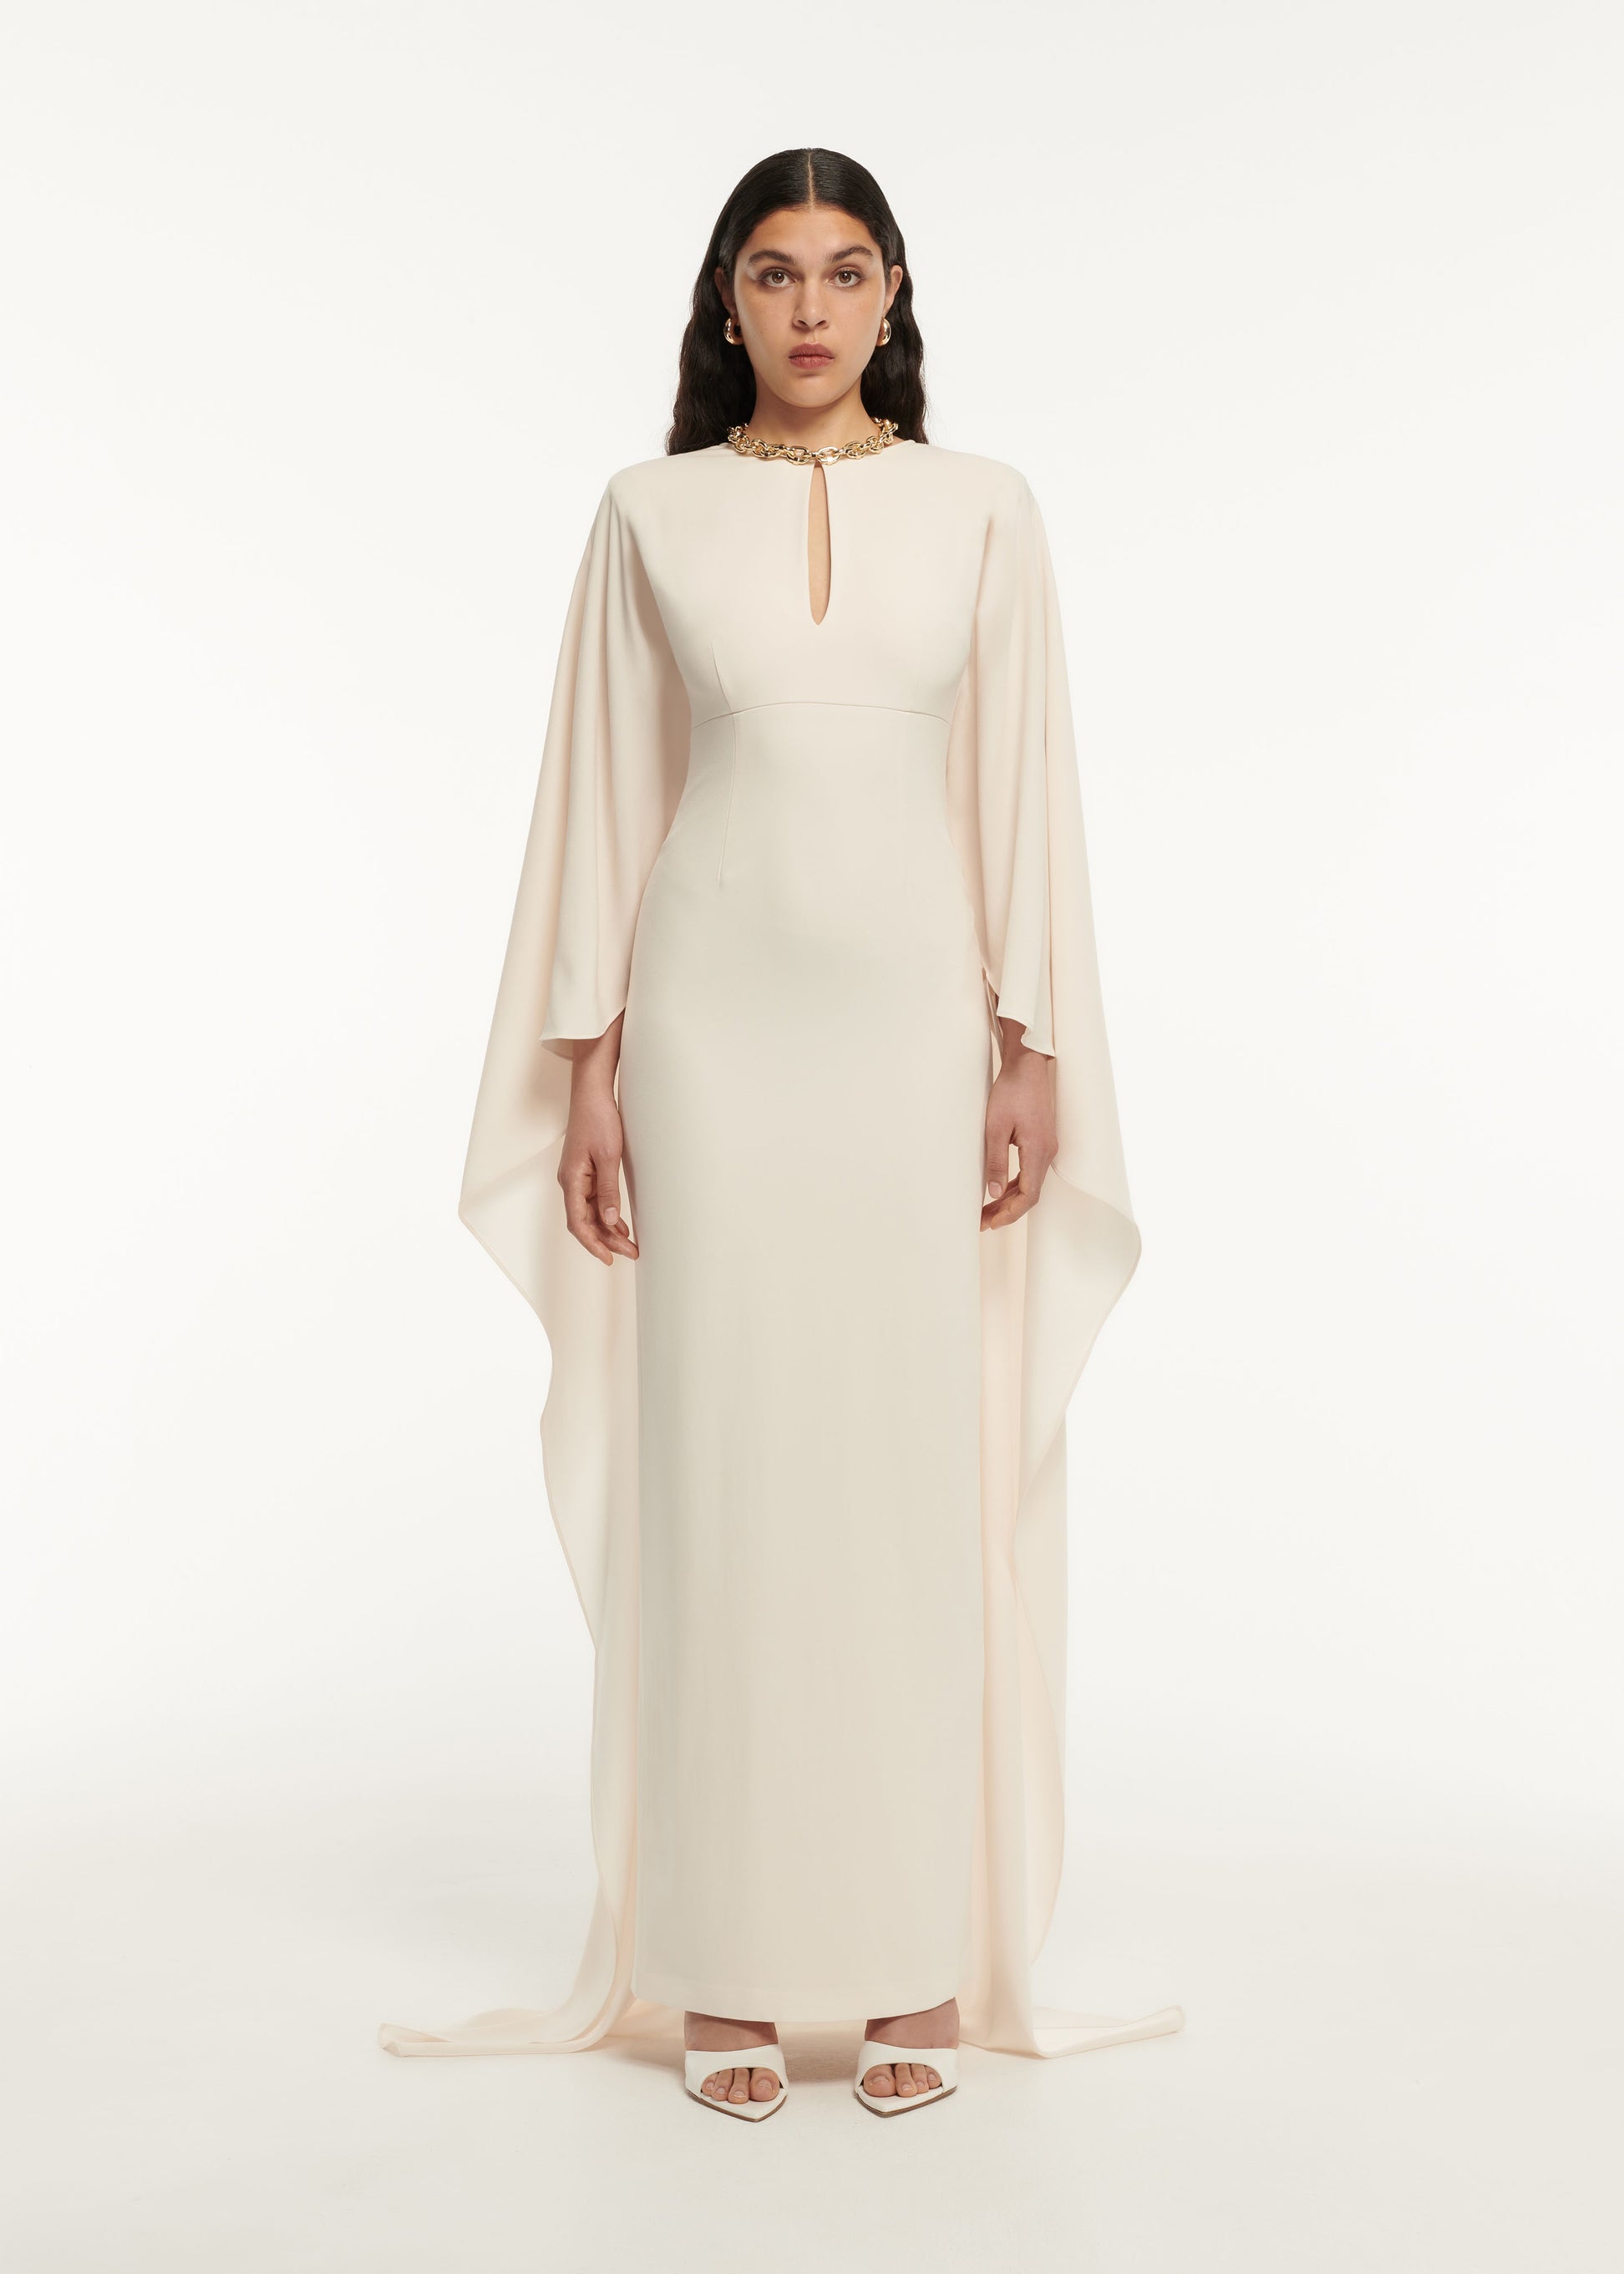 A woman wearing the Long Sleeve Satin Crepe Maxi Dress in Cream